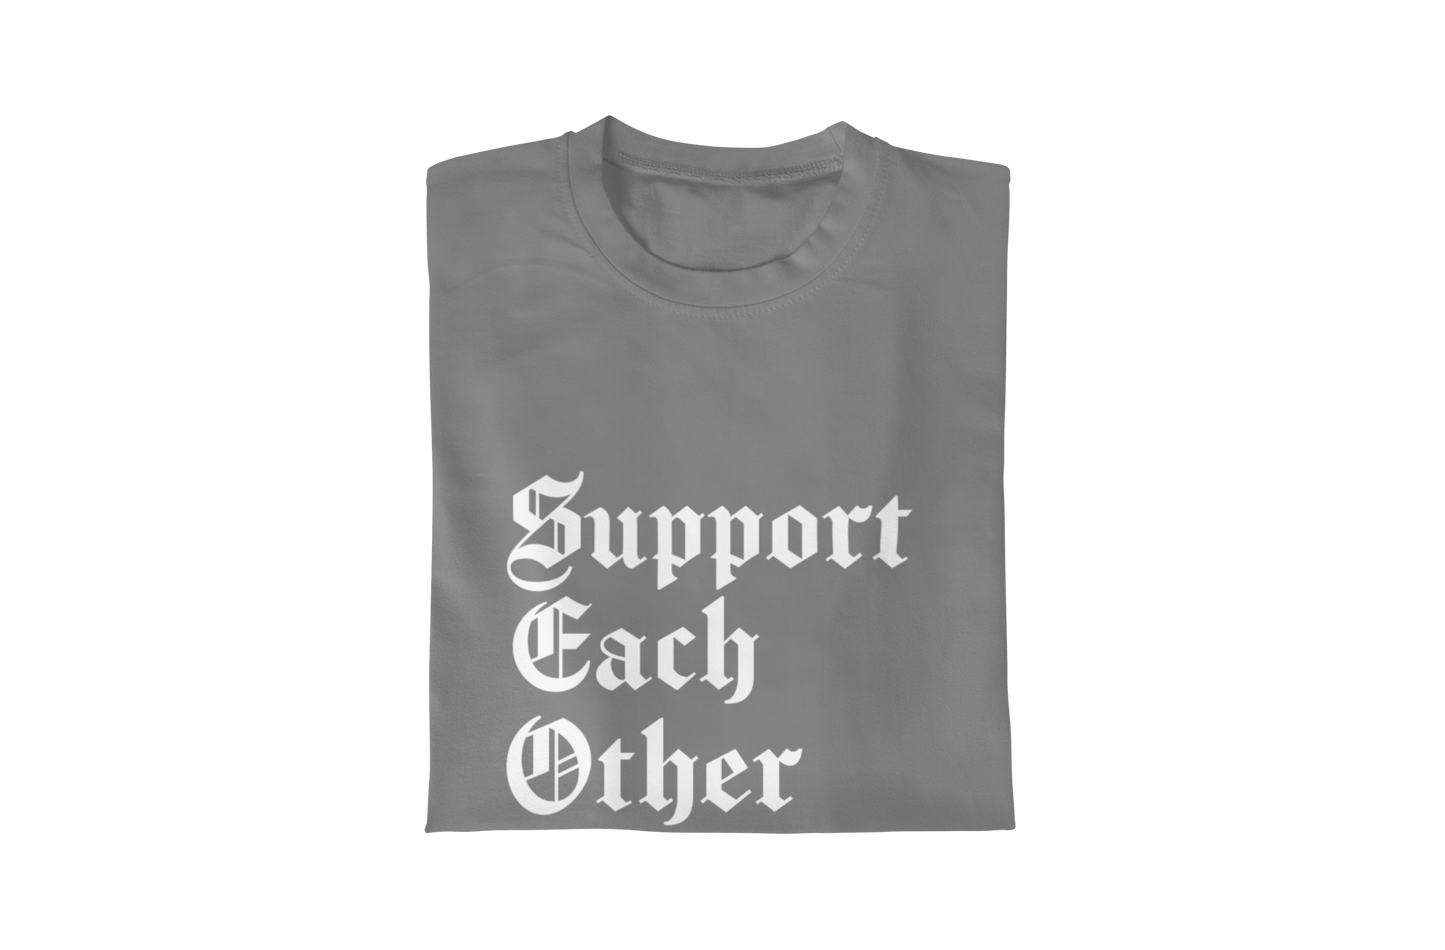 Support Each Other